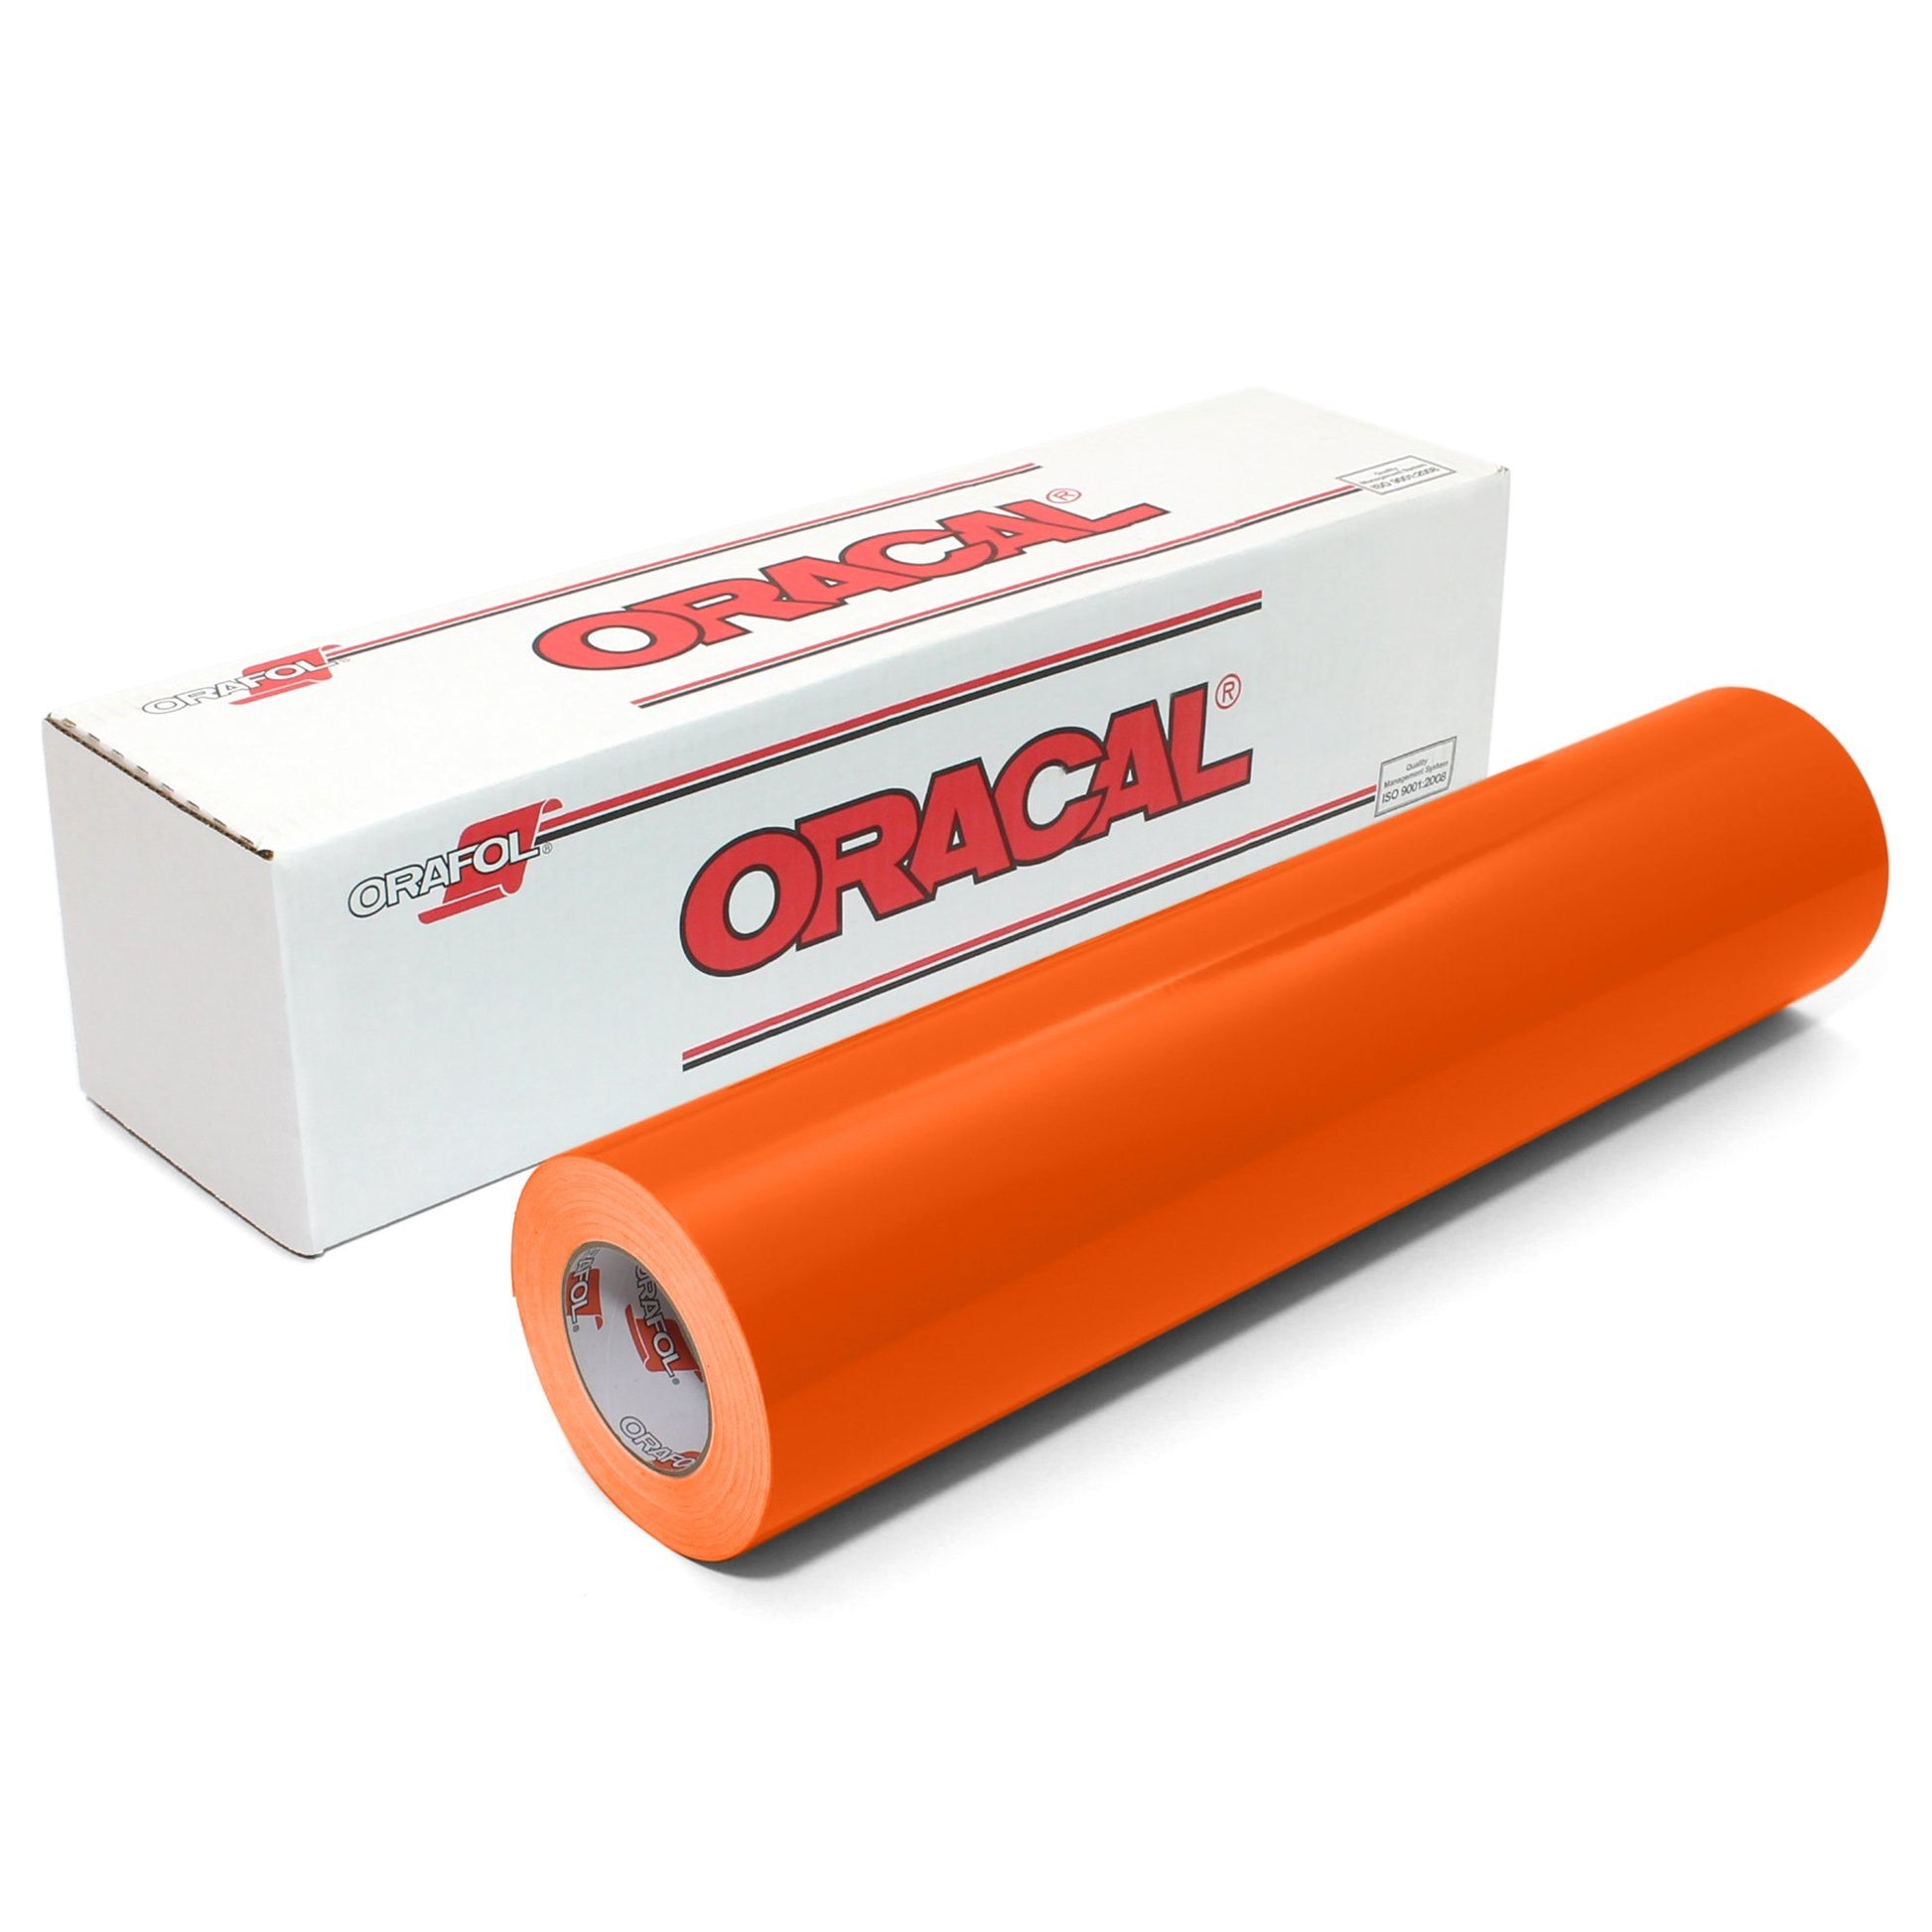 Oracal 651 - Coral - 341 - 12 x 10 ft Roll